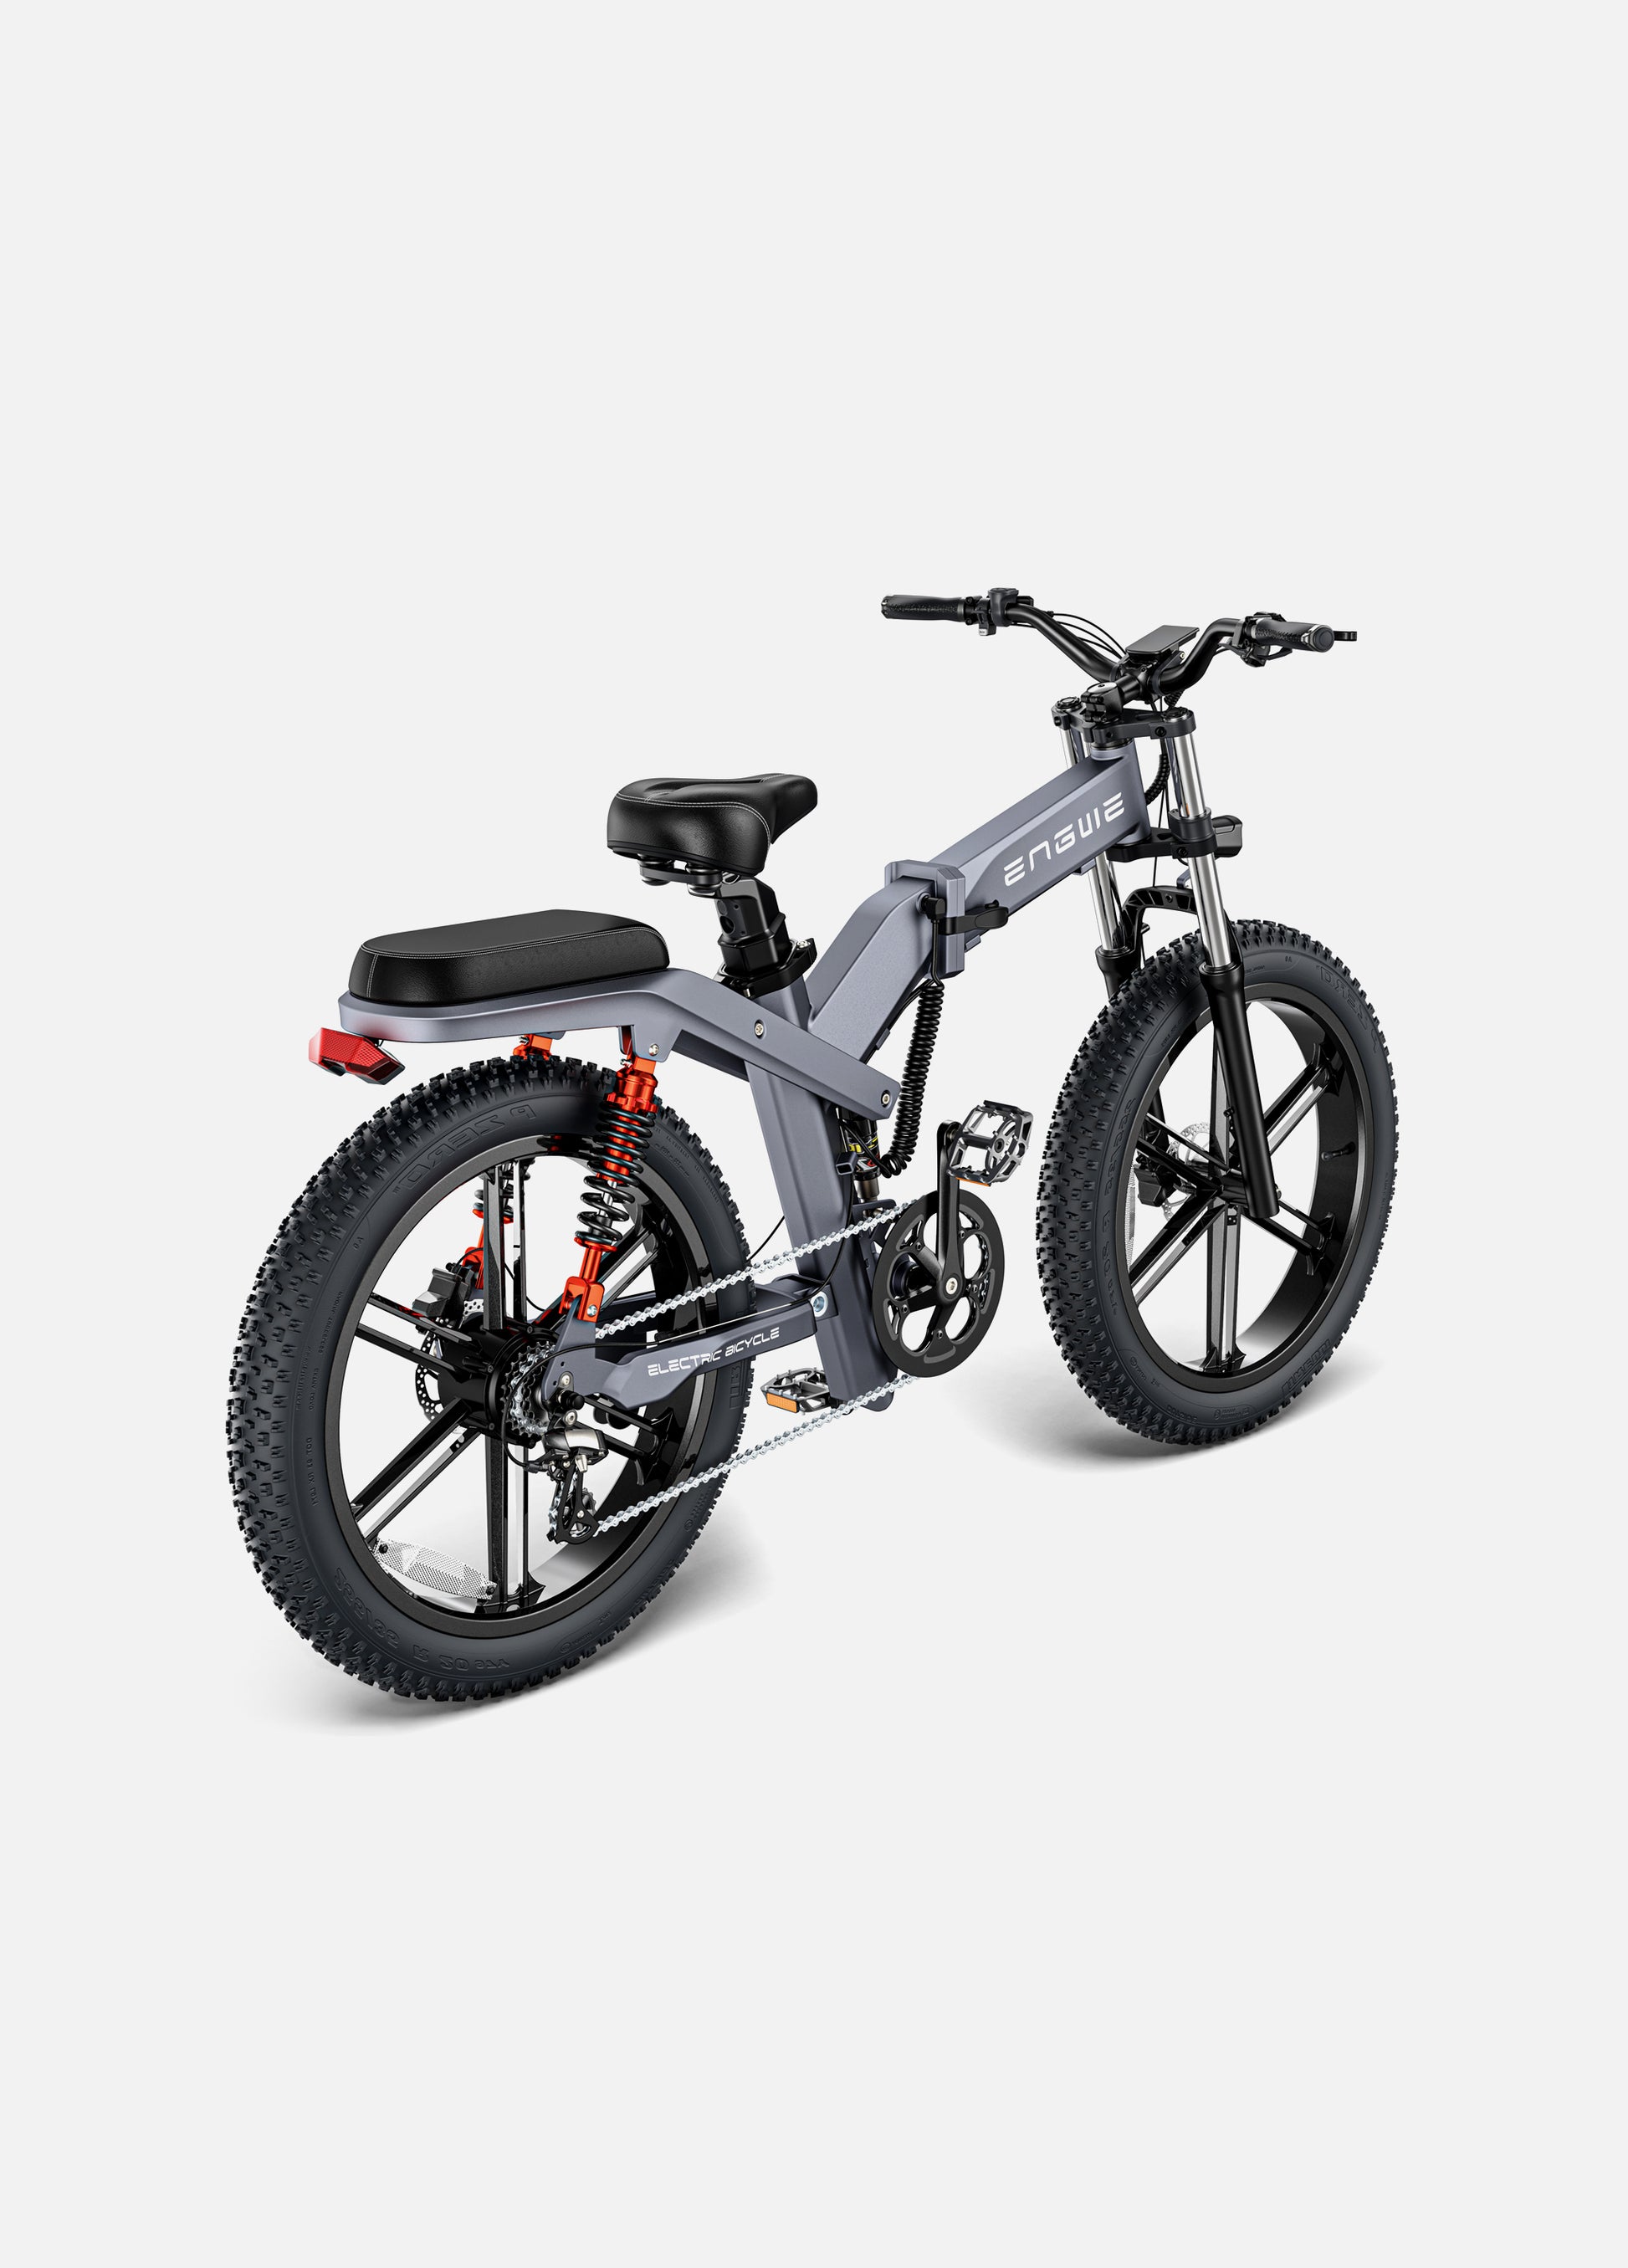 Rear View of Engwe X26 electric mountain bike in full view, highlighting its powerful structure and off-road capabilities.